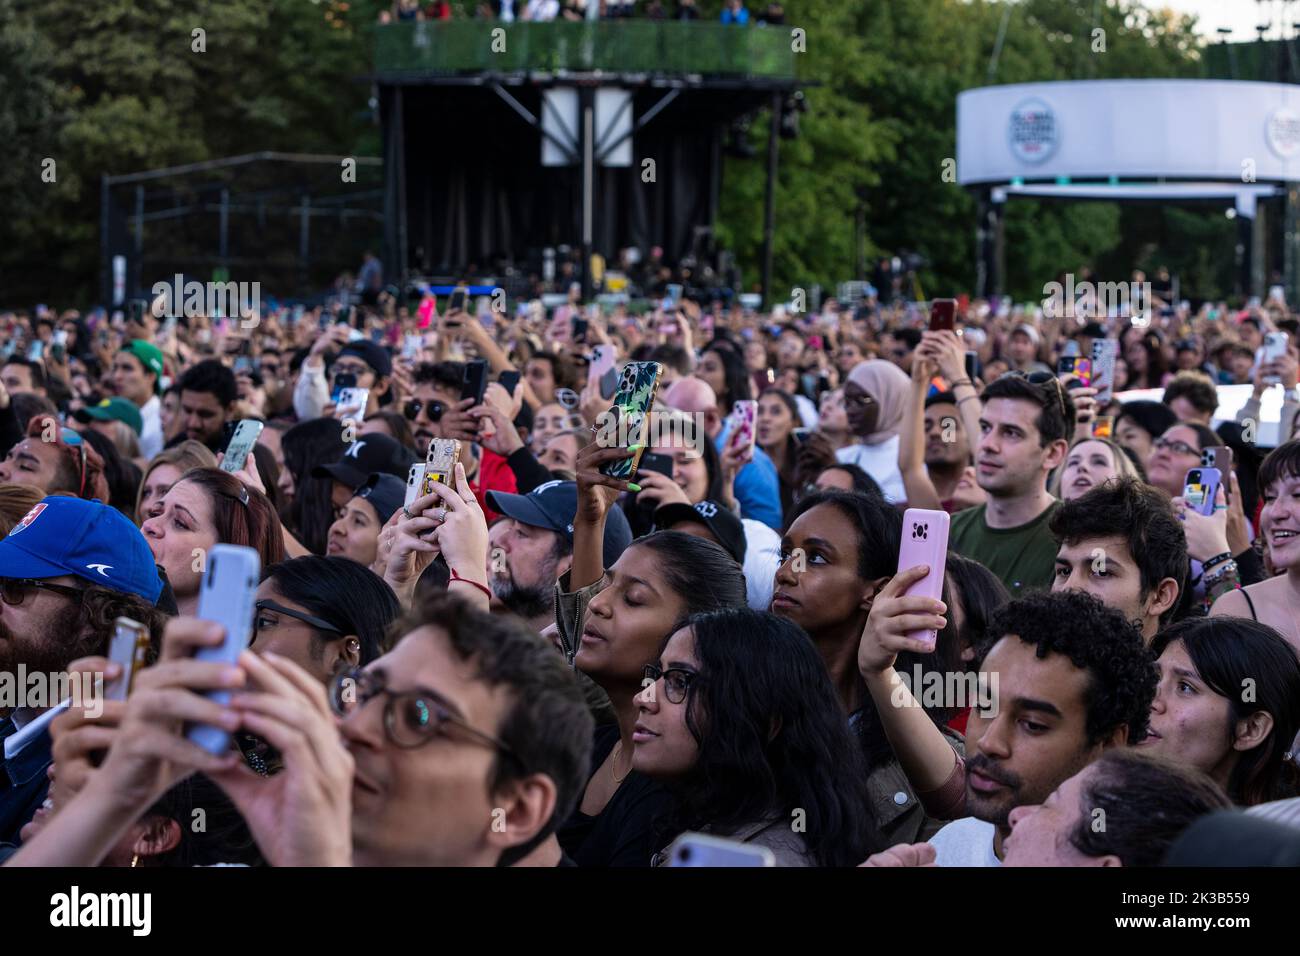 New York, NY - September 24, 2022: Audience reacts at Global Citizen Festival NYC in Central Park Stock Photo